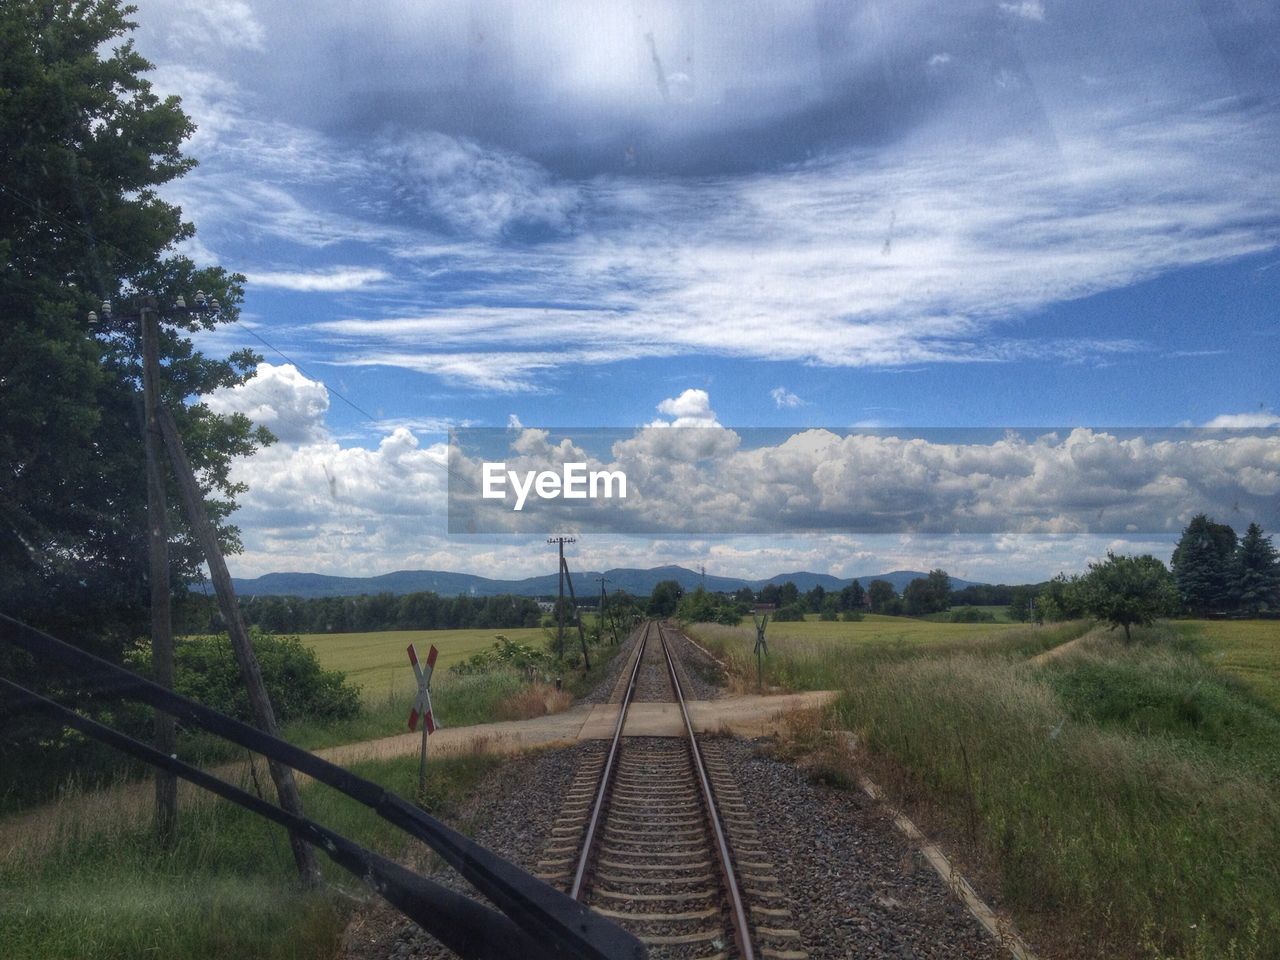 Railway tracks surrounded by grassy landscape seen through train windshield